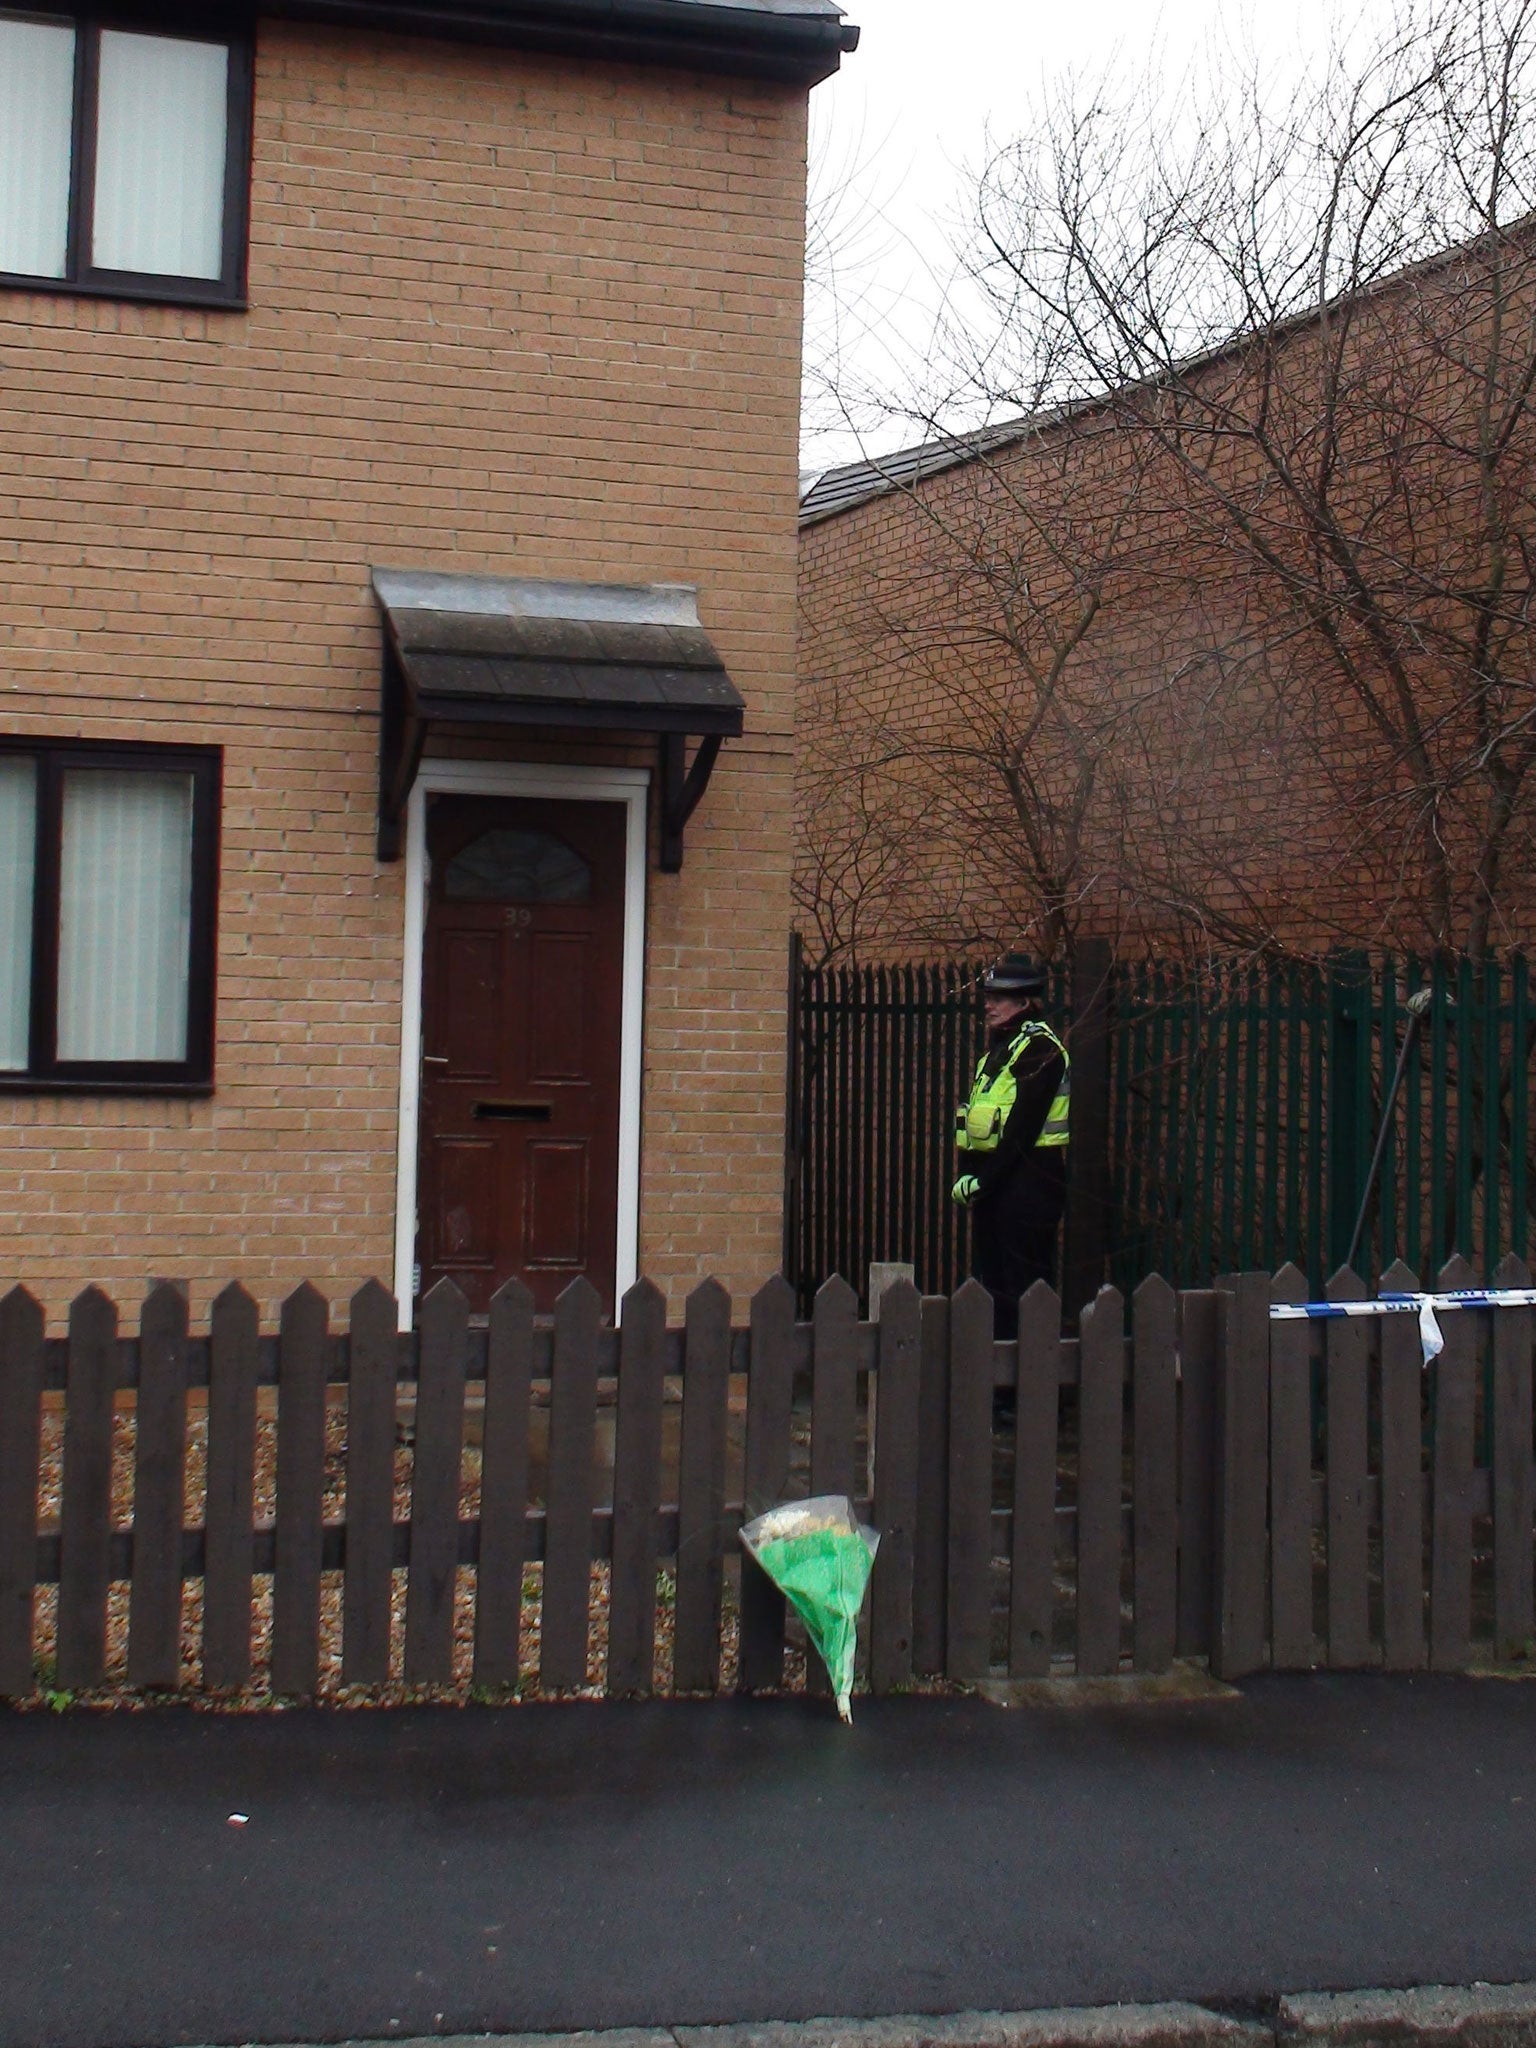 A police woman stands outside a house on Delamere Street, Bradford, following reports that a woman and child had been found unconscious outside the back of the house.